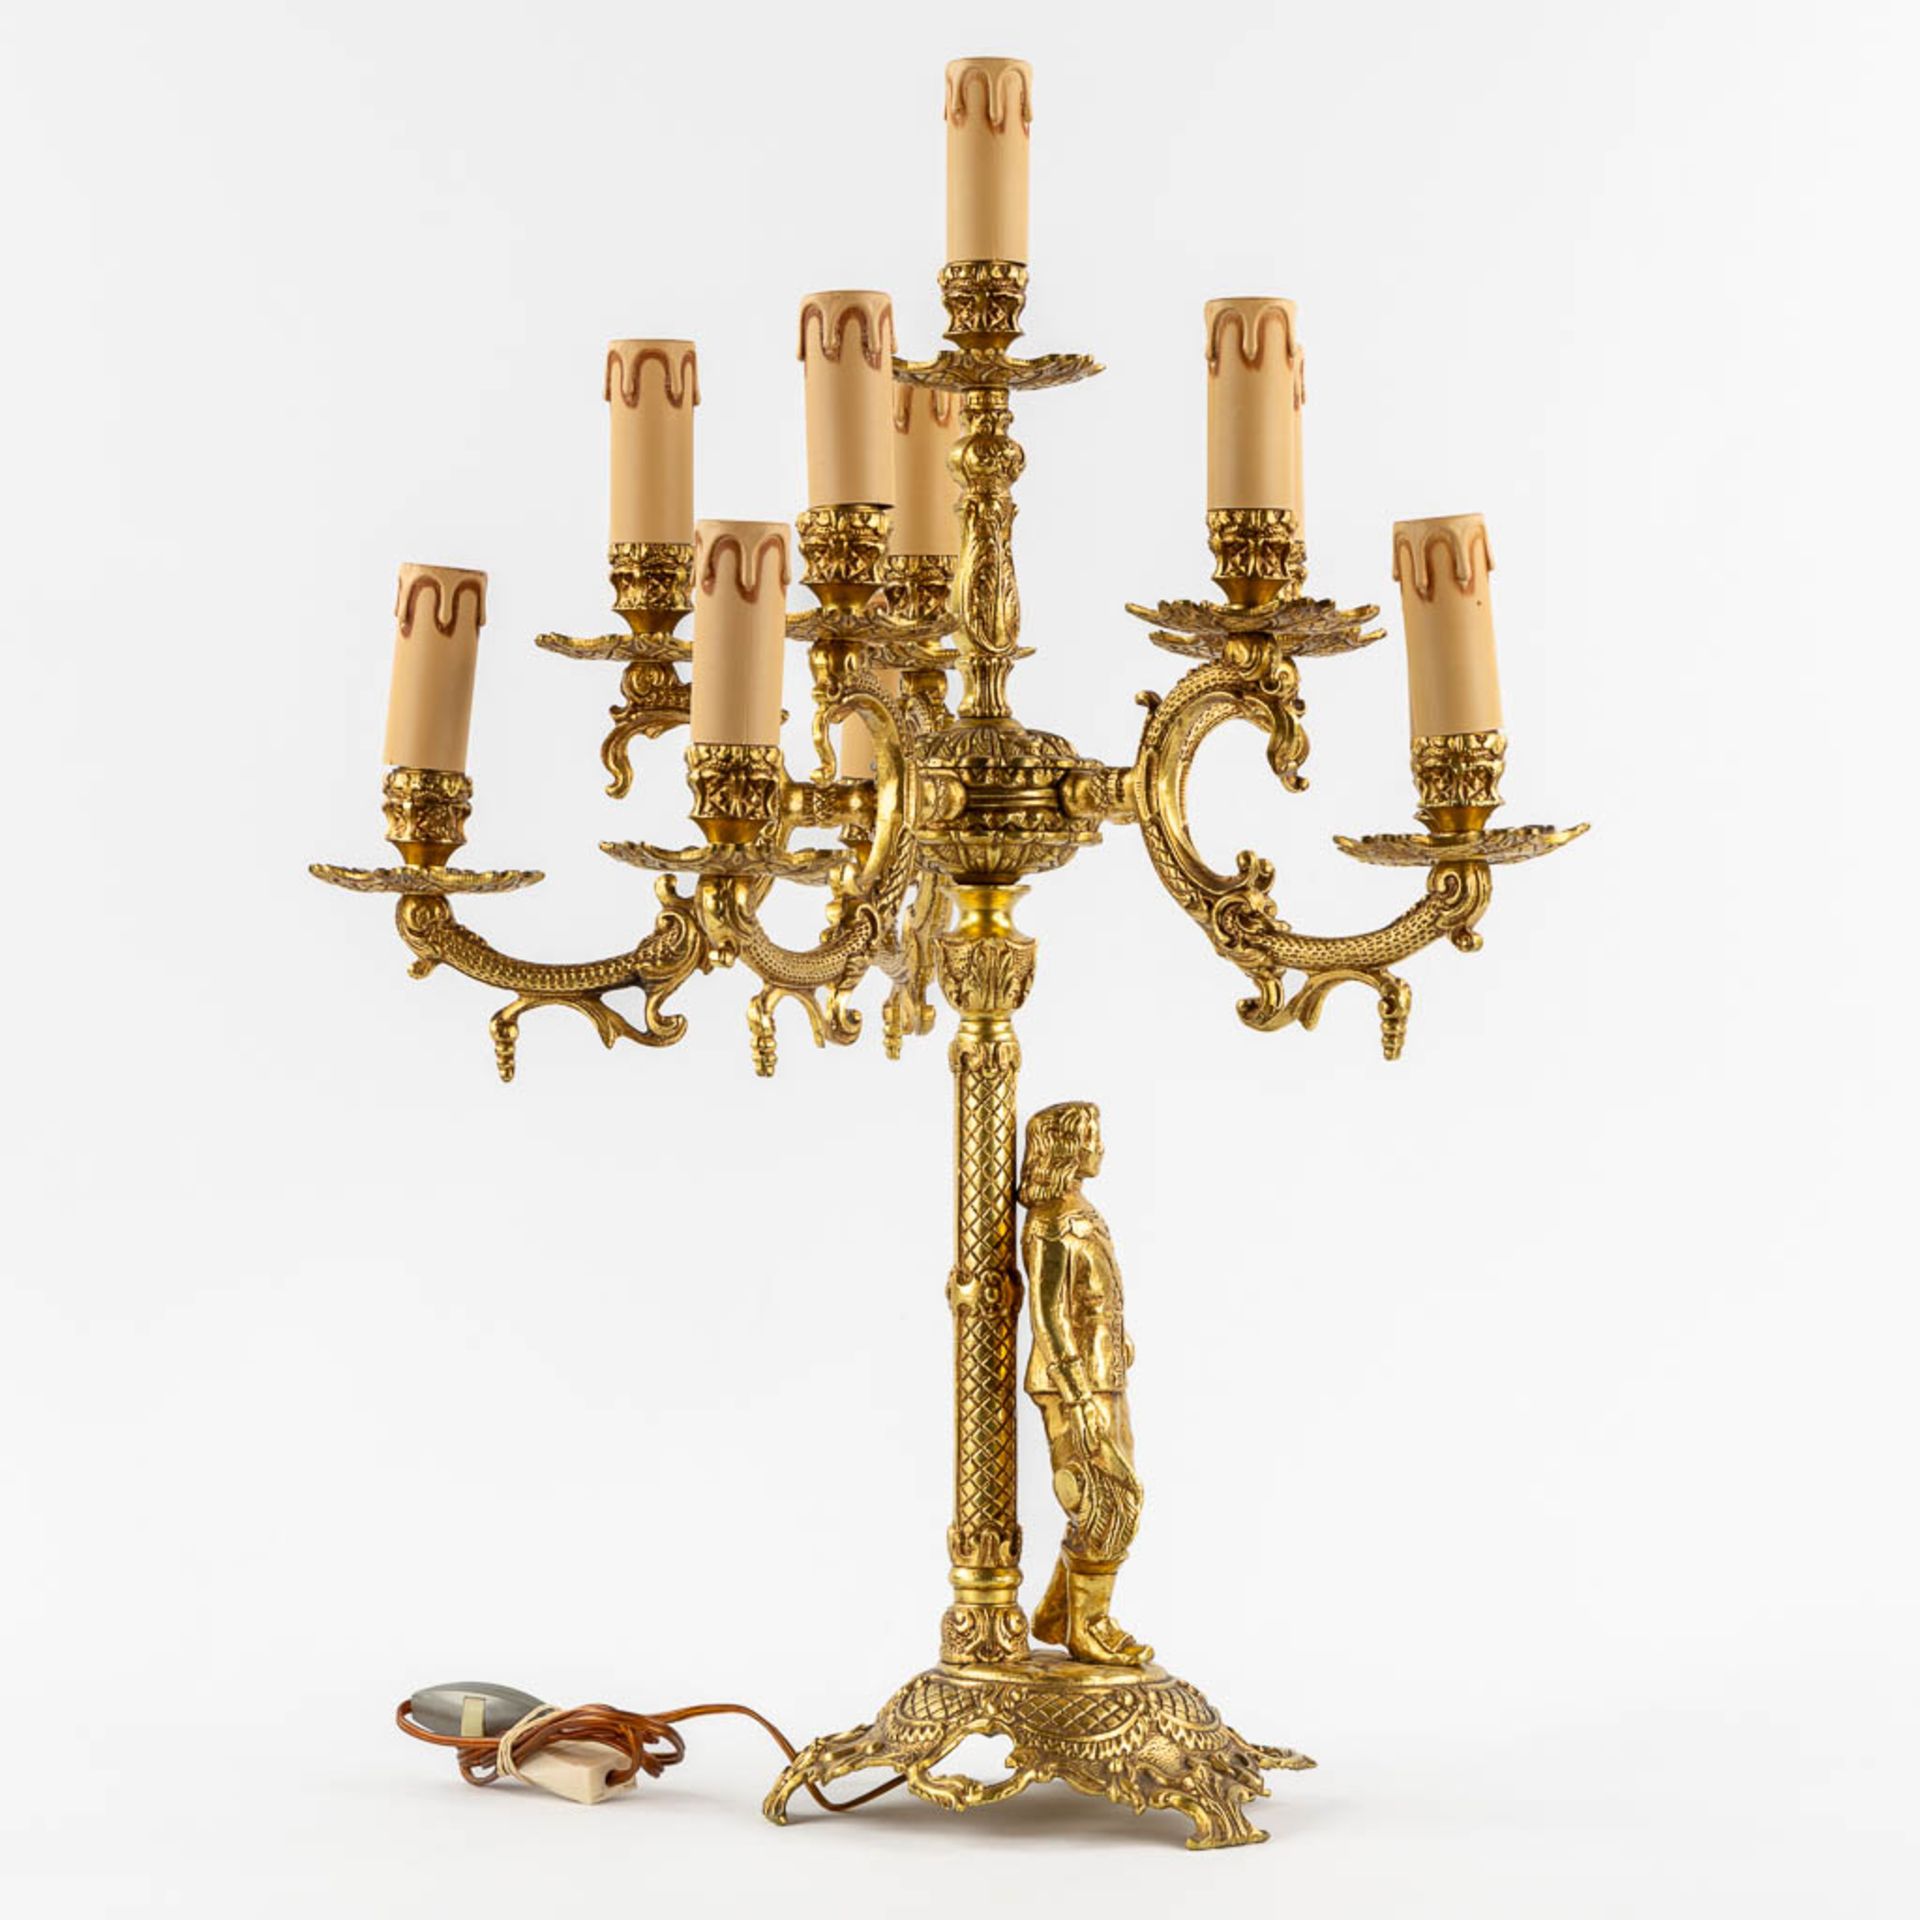 A large and decorative table lamp with a musketeer figurine, gilt bronze. 20th C. (H:61 x D:46 cm) - Bild 3 aus 11